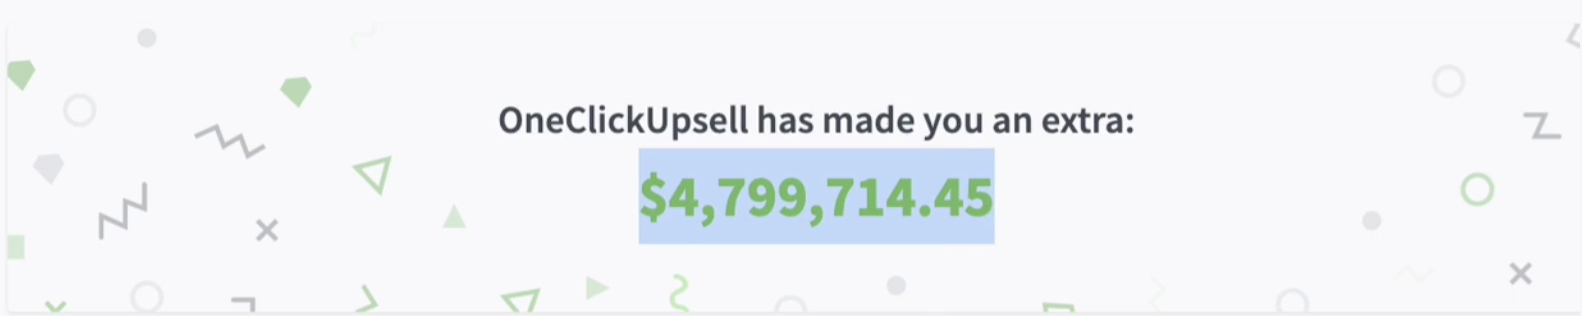 Dashboard screenshot reading "OneClickUpsell has made you an extra: $4,799,714.45".